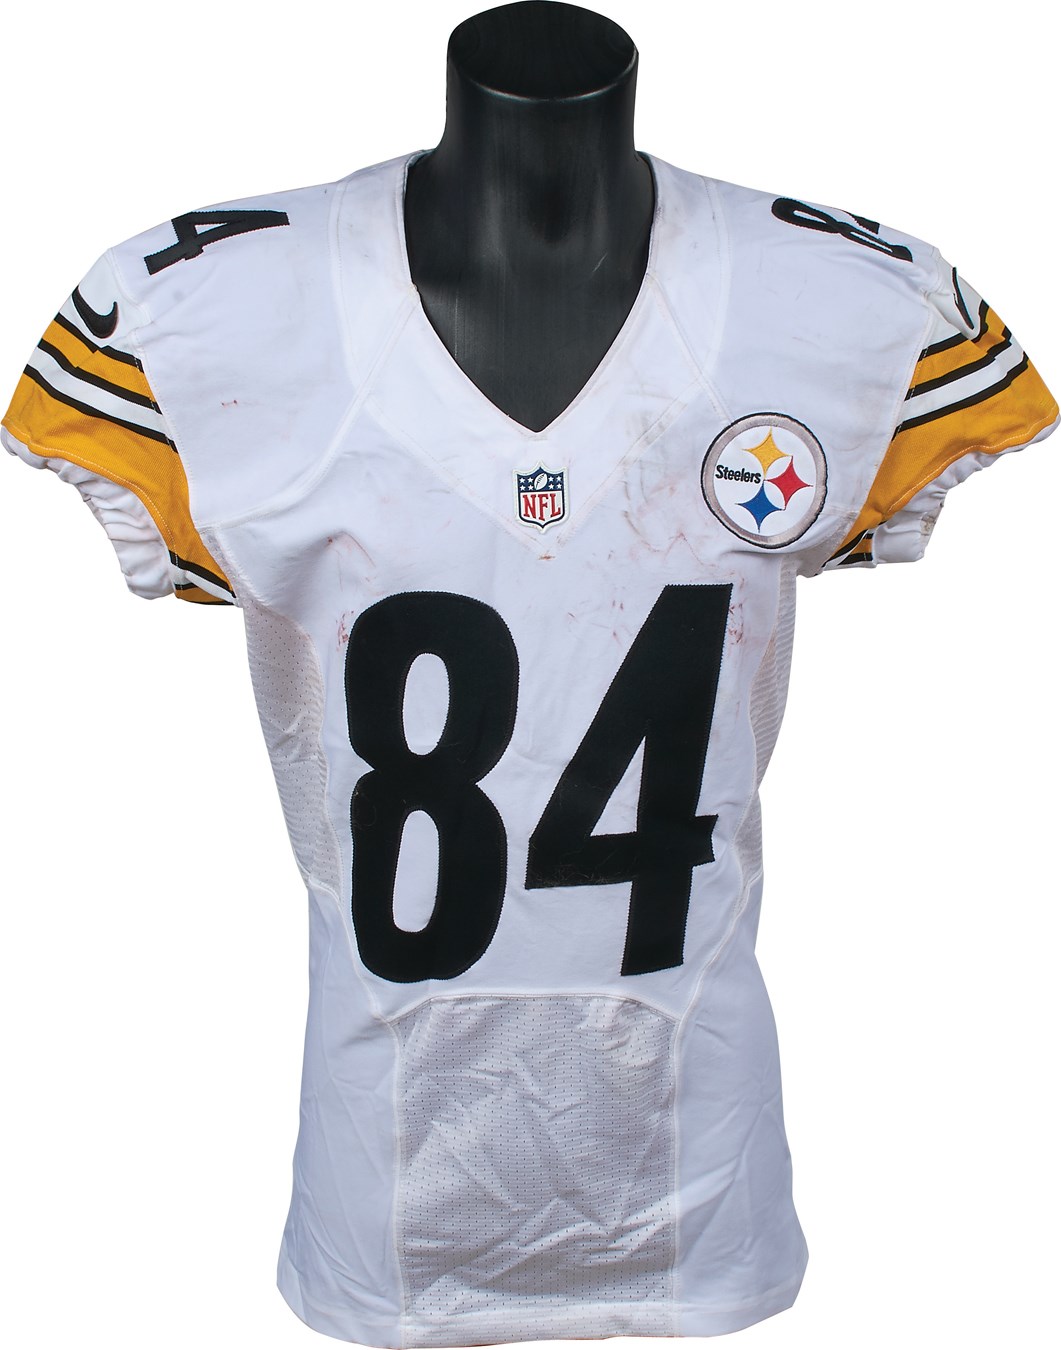 Football - September 11, 2014 Antonio Brown Pittsburgh Steelers Signed Game Worn Jersey (Photo-Match)